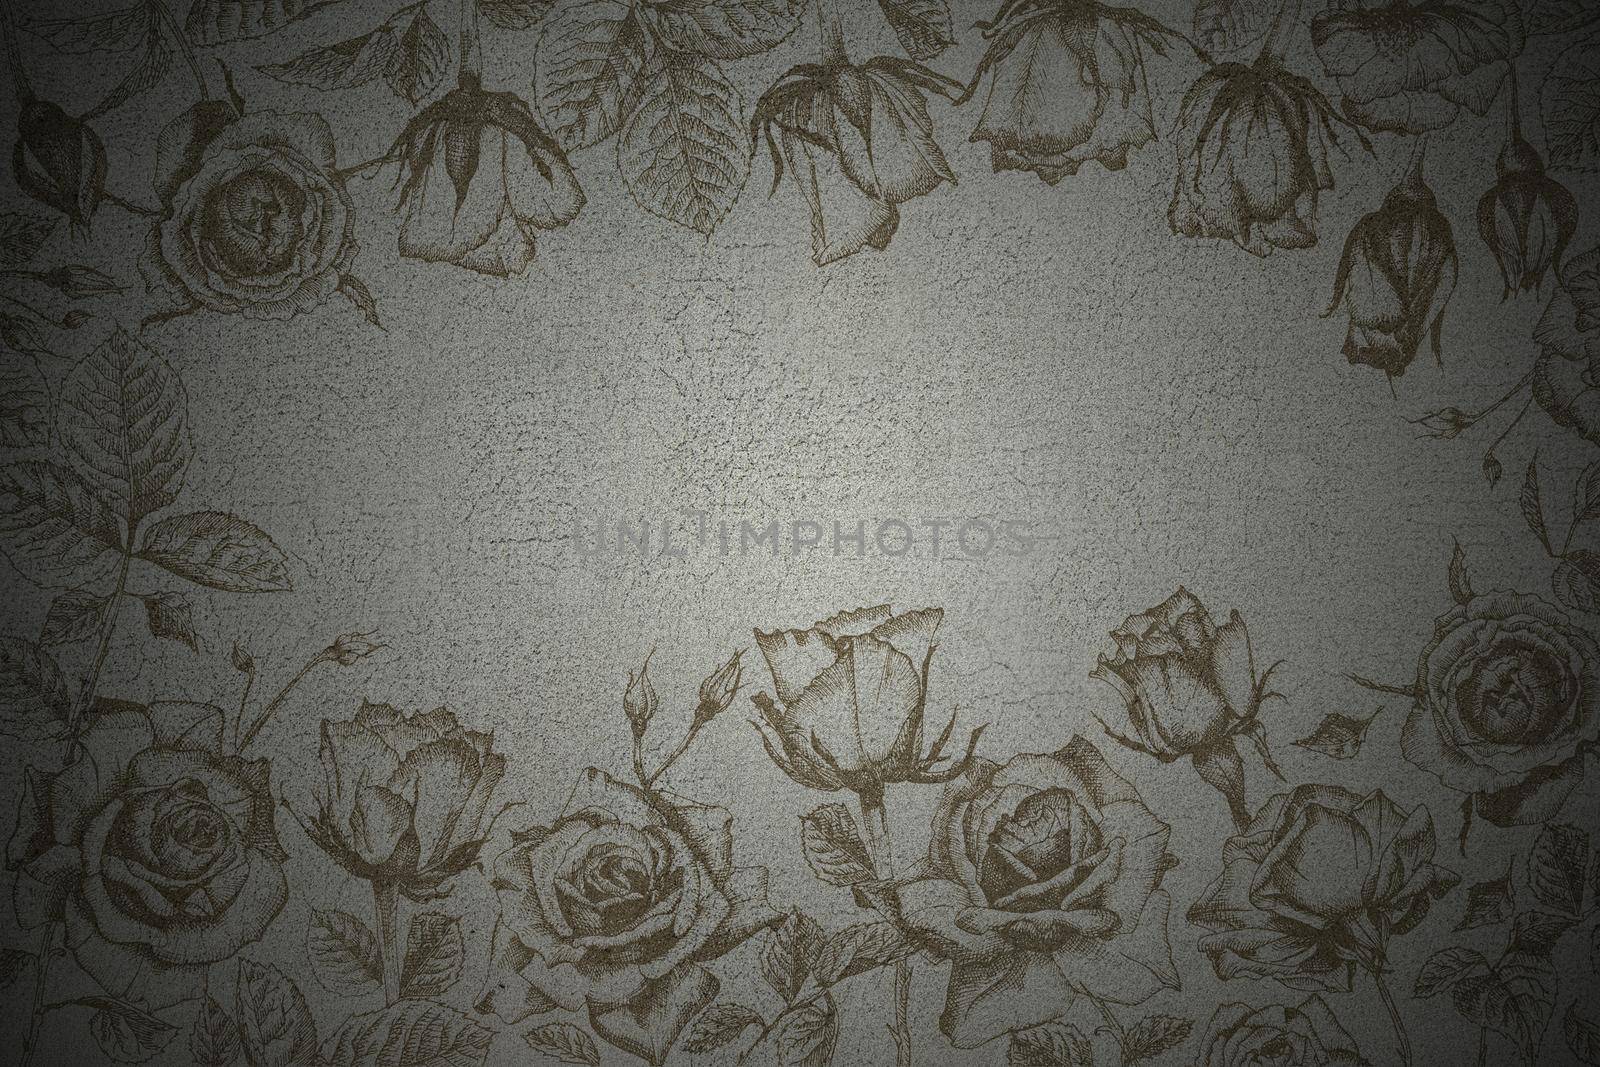 Fine Art Natural concrete Textures with Hand drawn roses Flower overlay. Portrait Photo Floral Textures Backdrop Digital Studio Background, Best for cute family photos, atmospheric newborn design